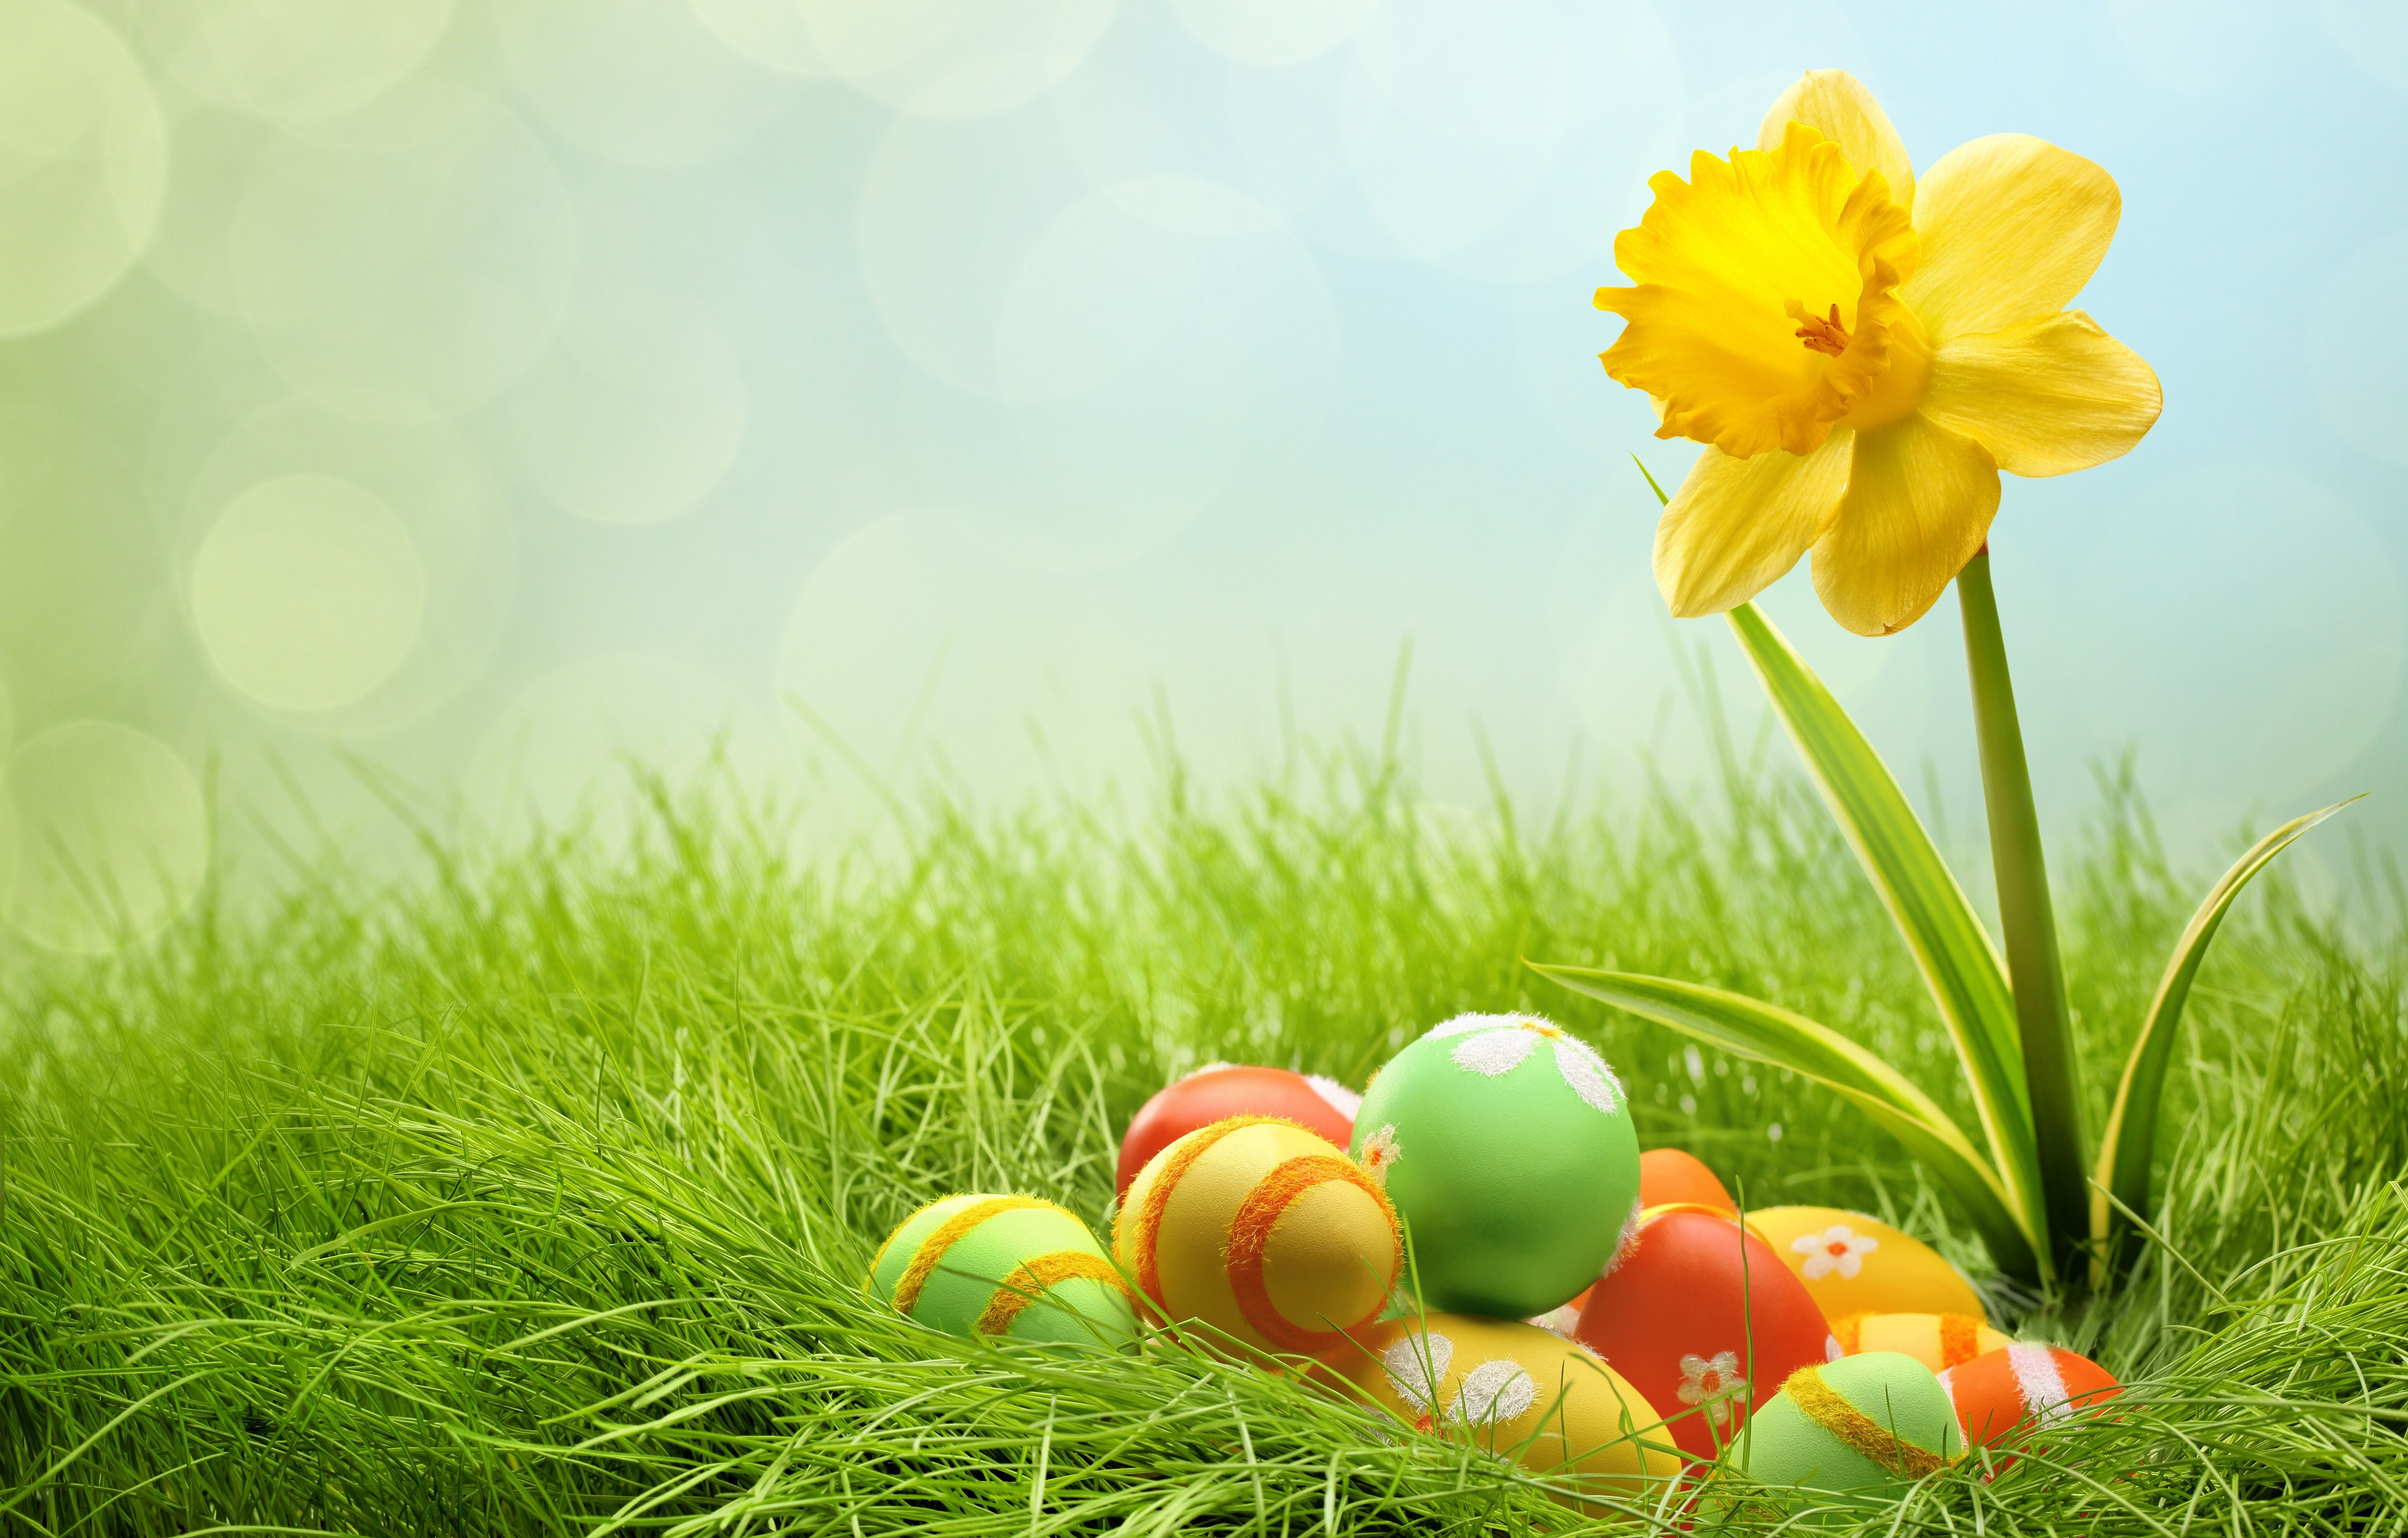 Eggs and yellow flower for Easter wallpapers and images   wallpapers